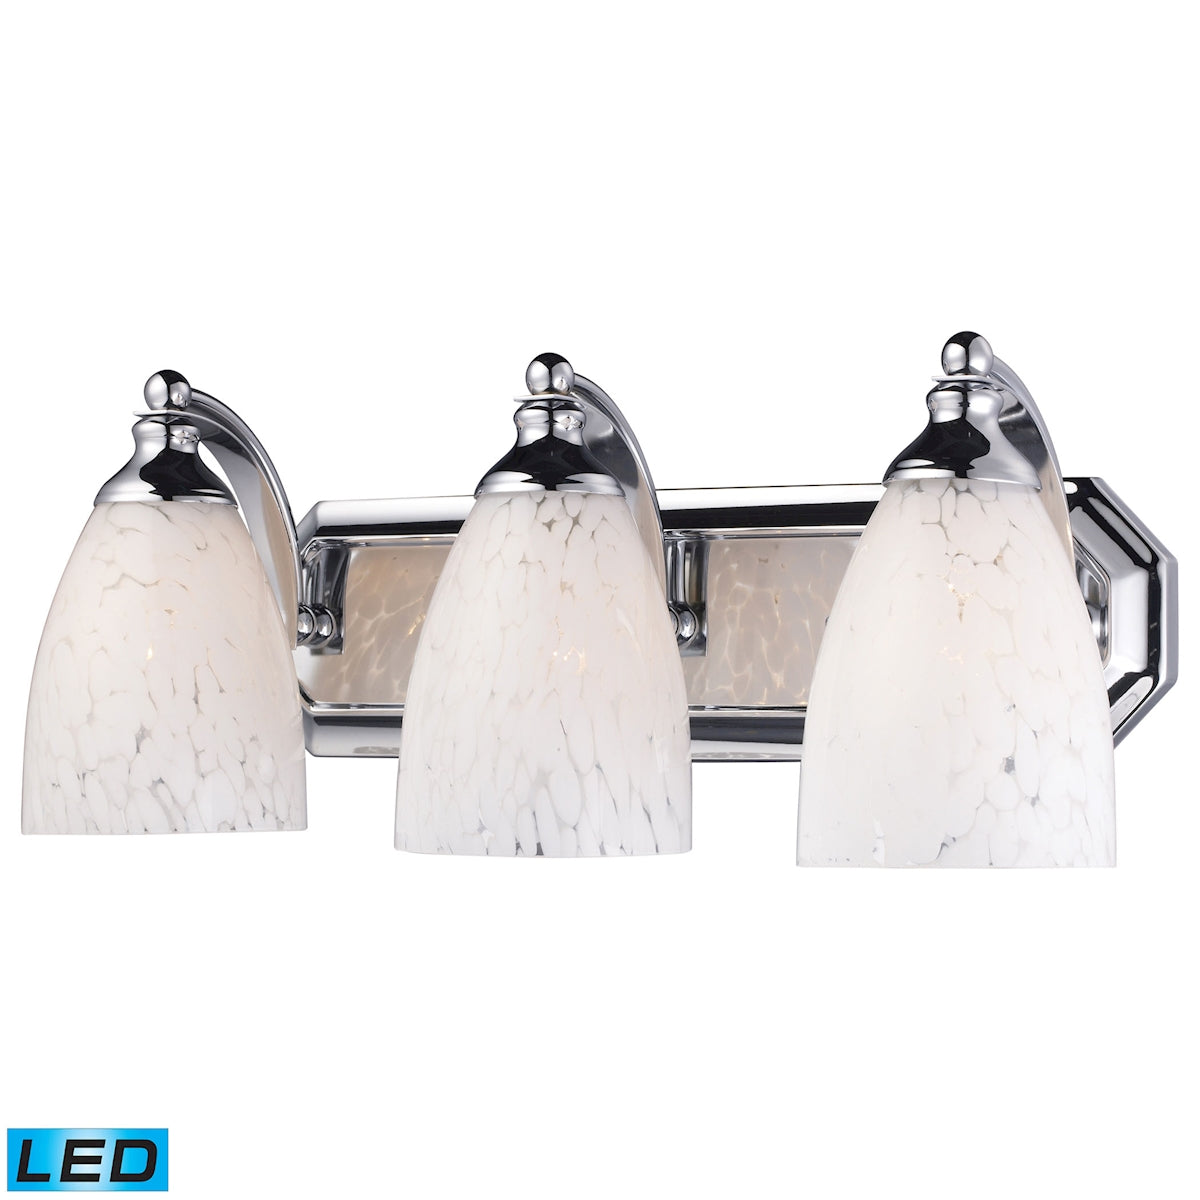 ELK Lighting 570-3C-SW-LED Mix and Match Vanity 3-Light Wall Lamp in Chrome with Snow White Glass - Includes LED Bulbs